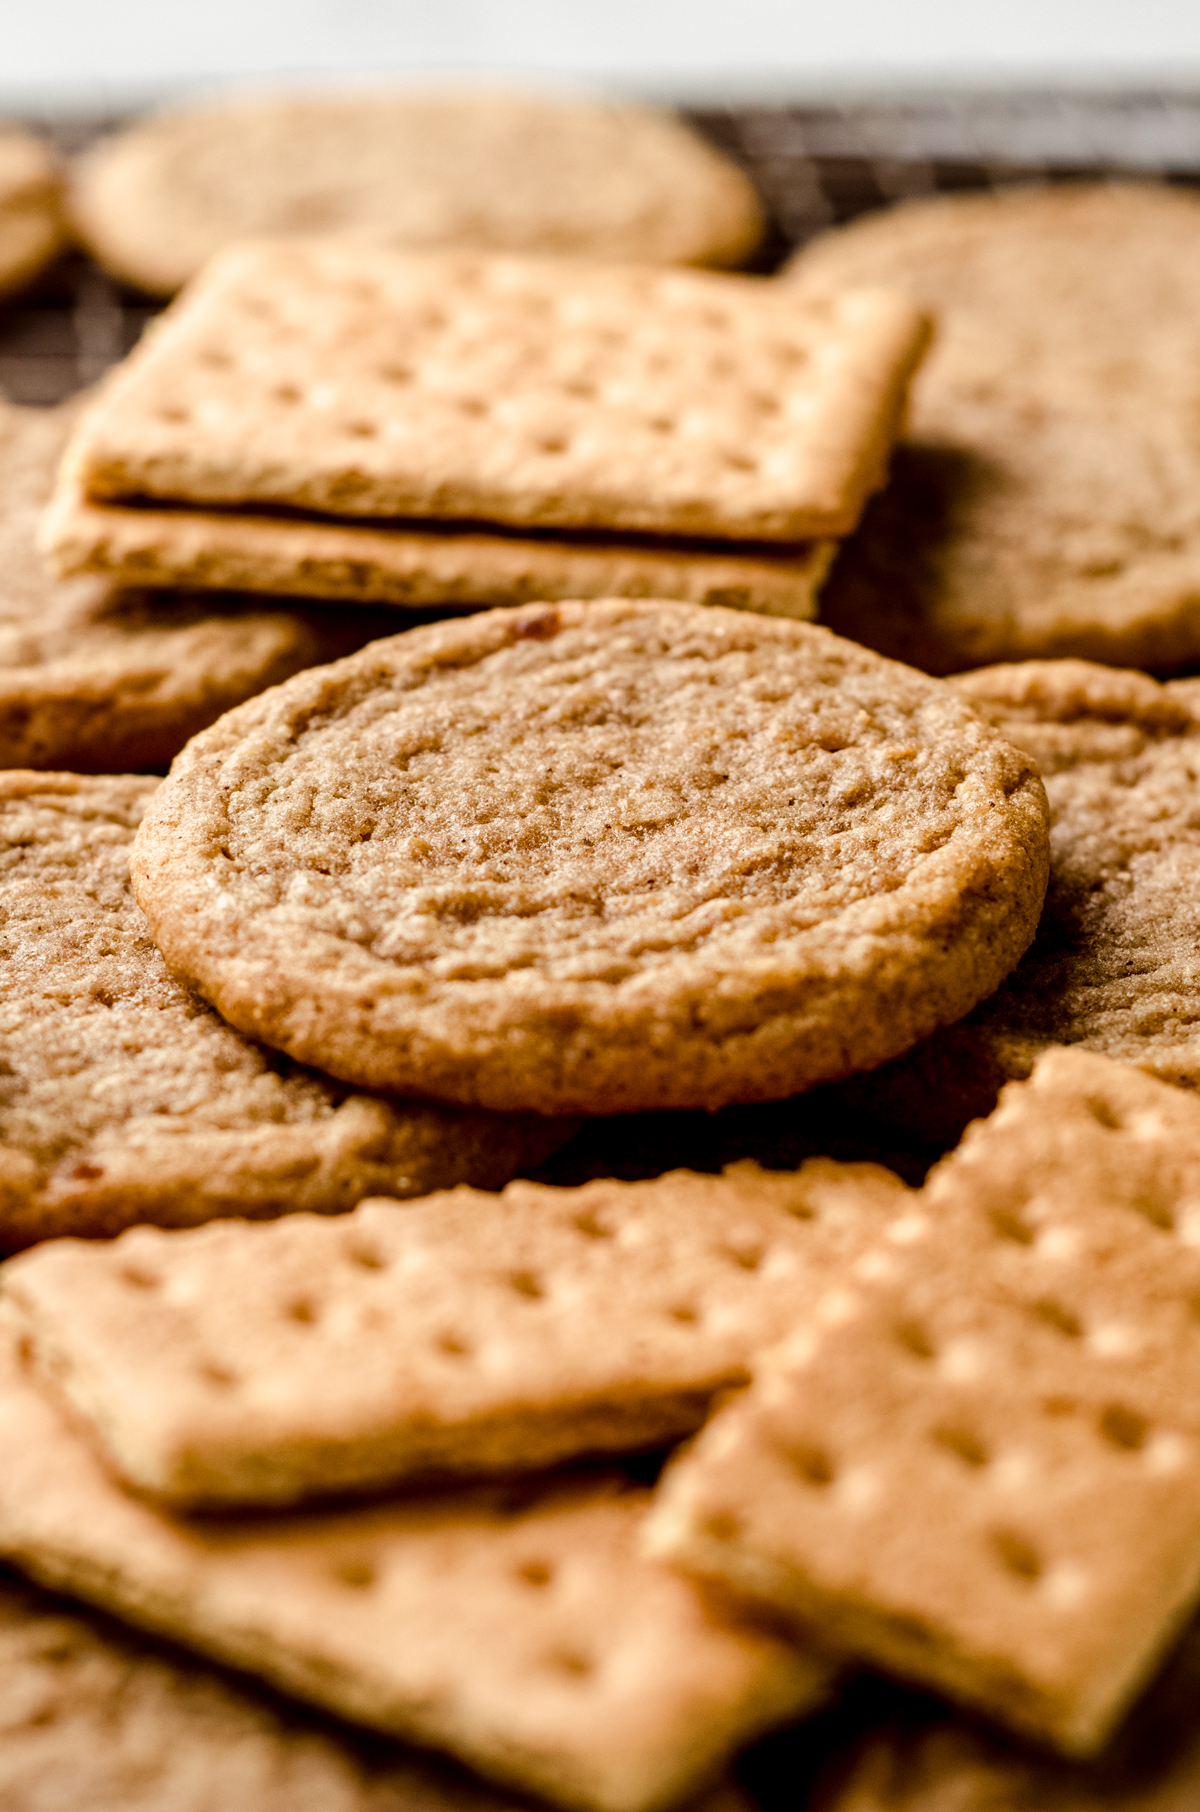 Graham cracker cookies on a surface with graham crackers around it.